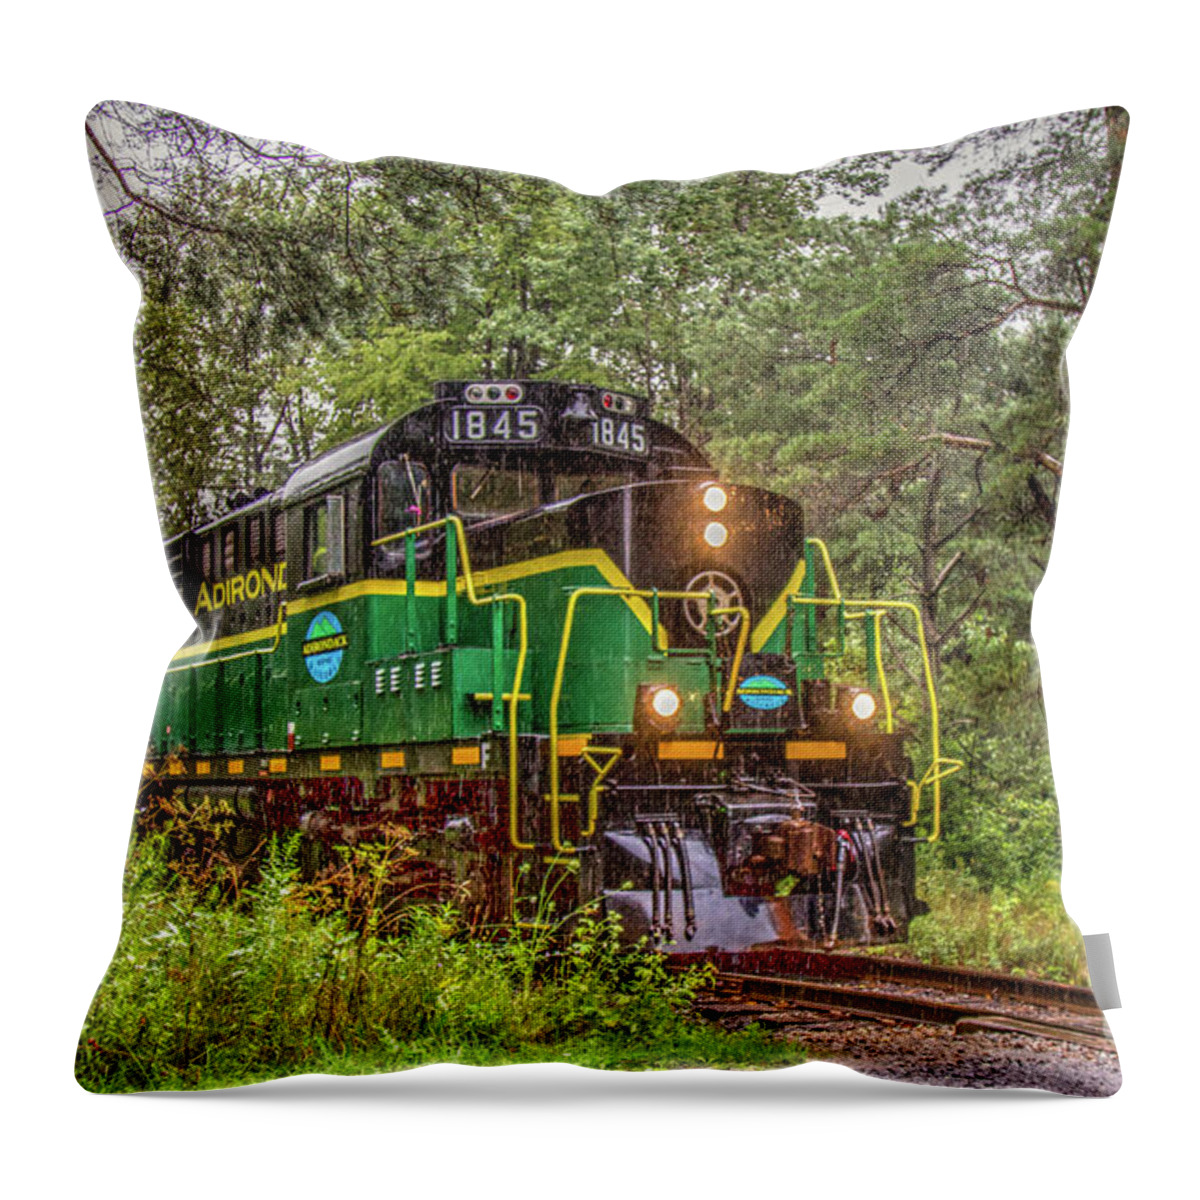 Railroad Throw Pillow featuring the photograph Adirondack Scenic RR Engine 1845 by Rod Best